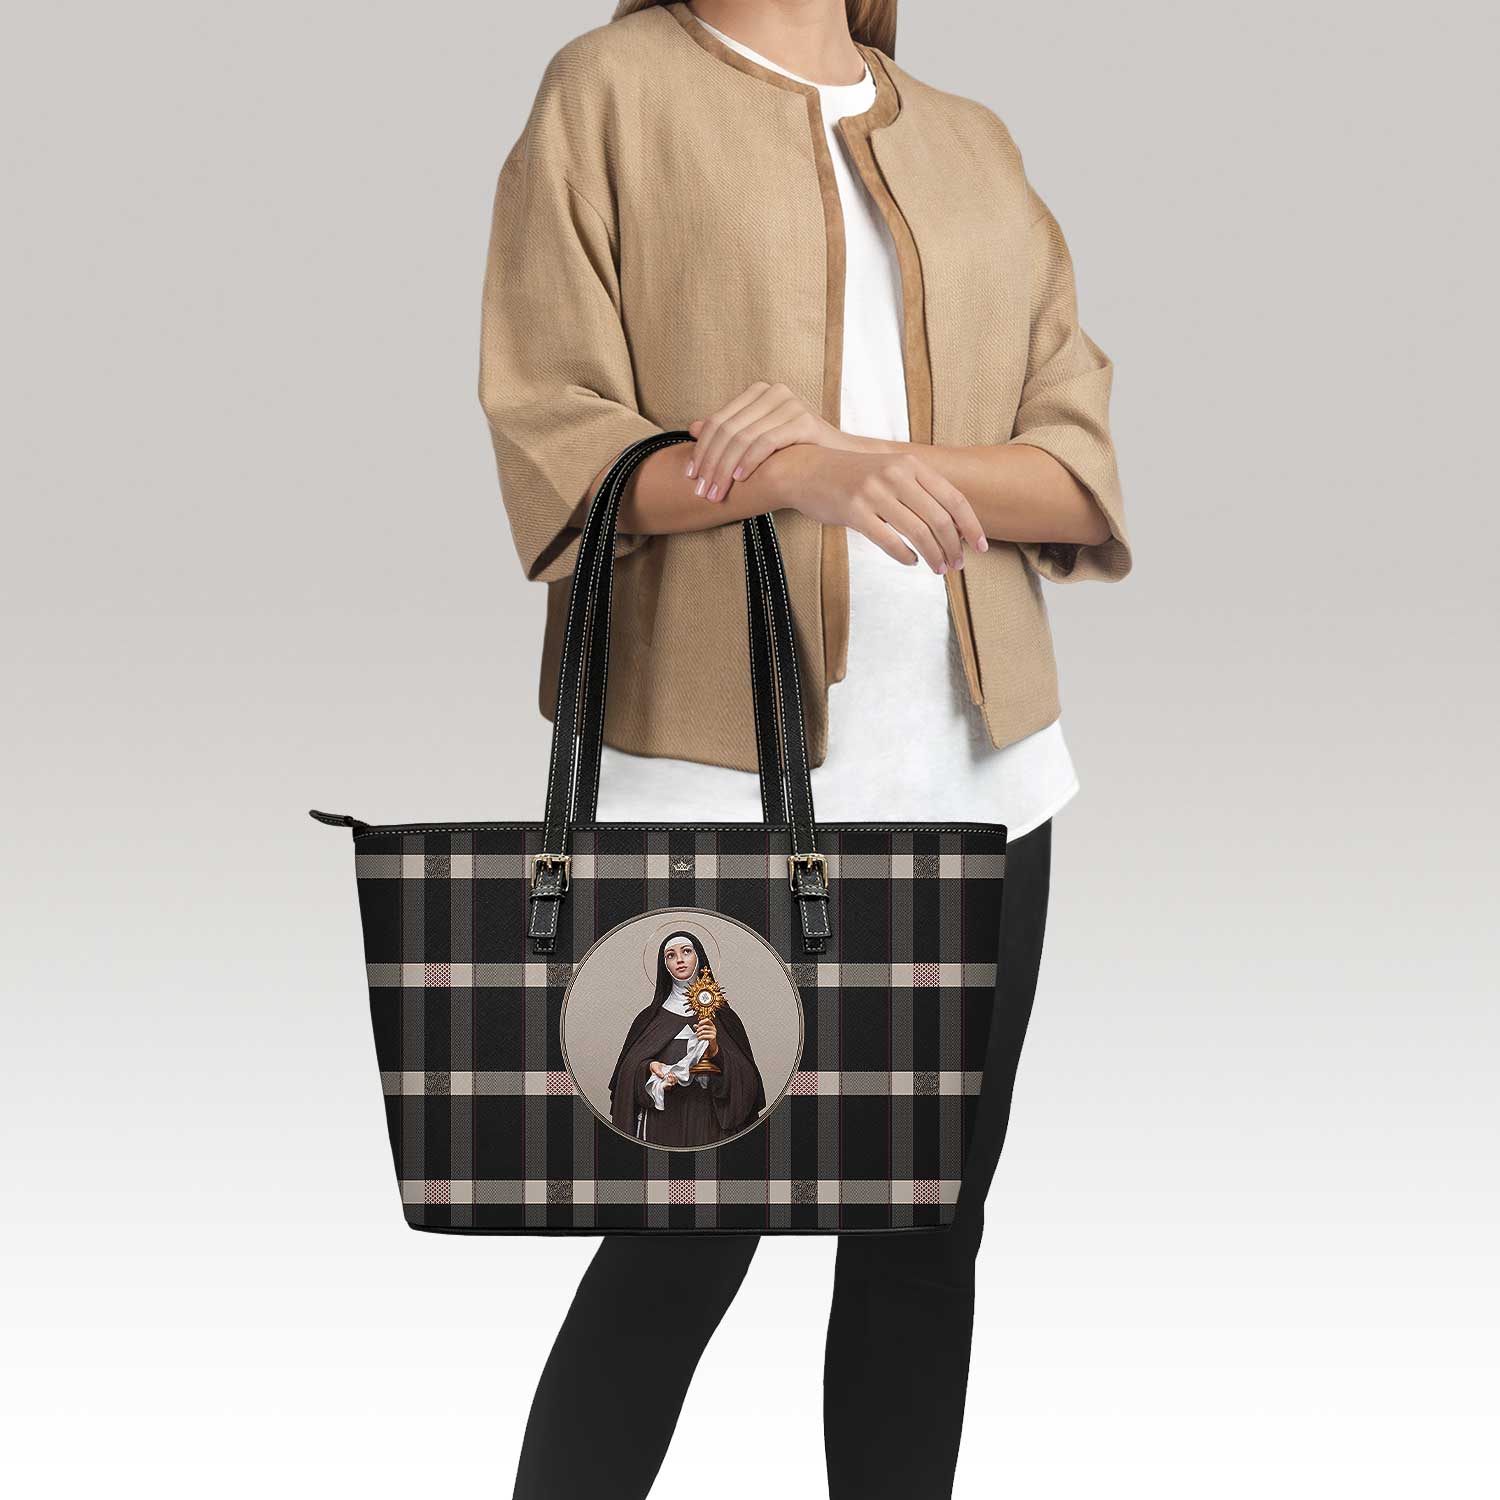 St. Clare of Assisi Tote Bag (Plaid)